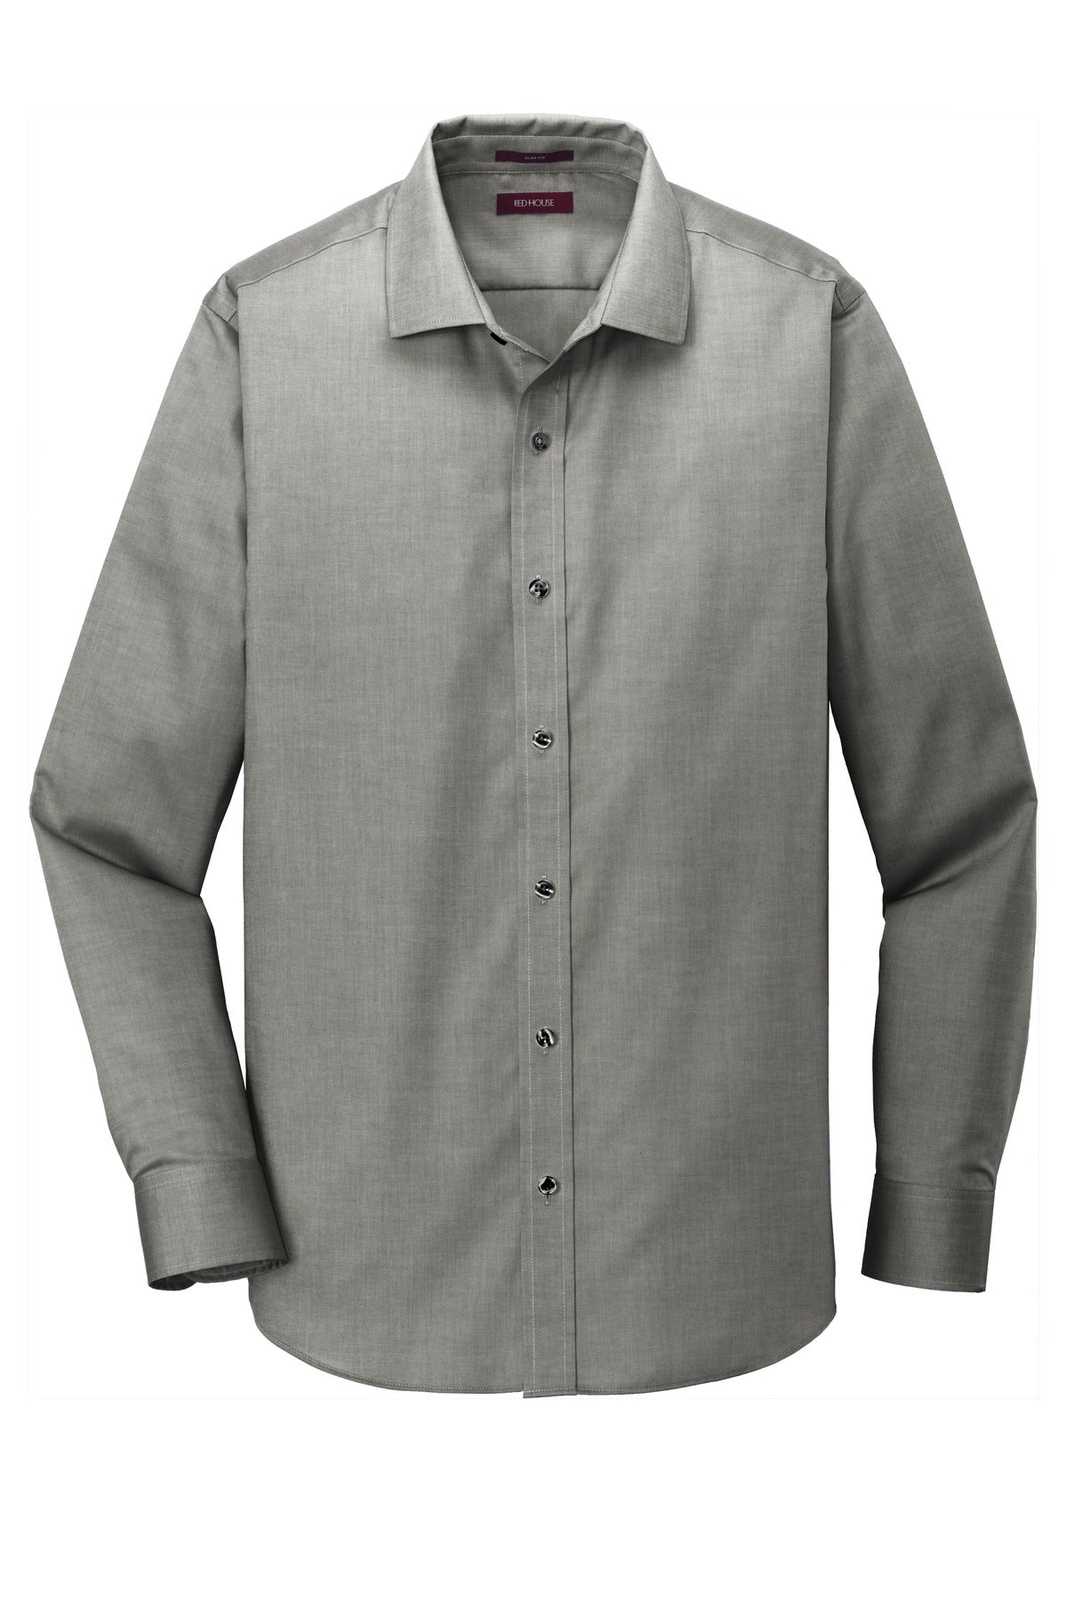 Red House RH620 Slim Fit Pinpoint Oxford Non-Iron Shirt - Charcoal - HIT a Double - 5